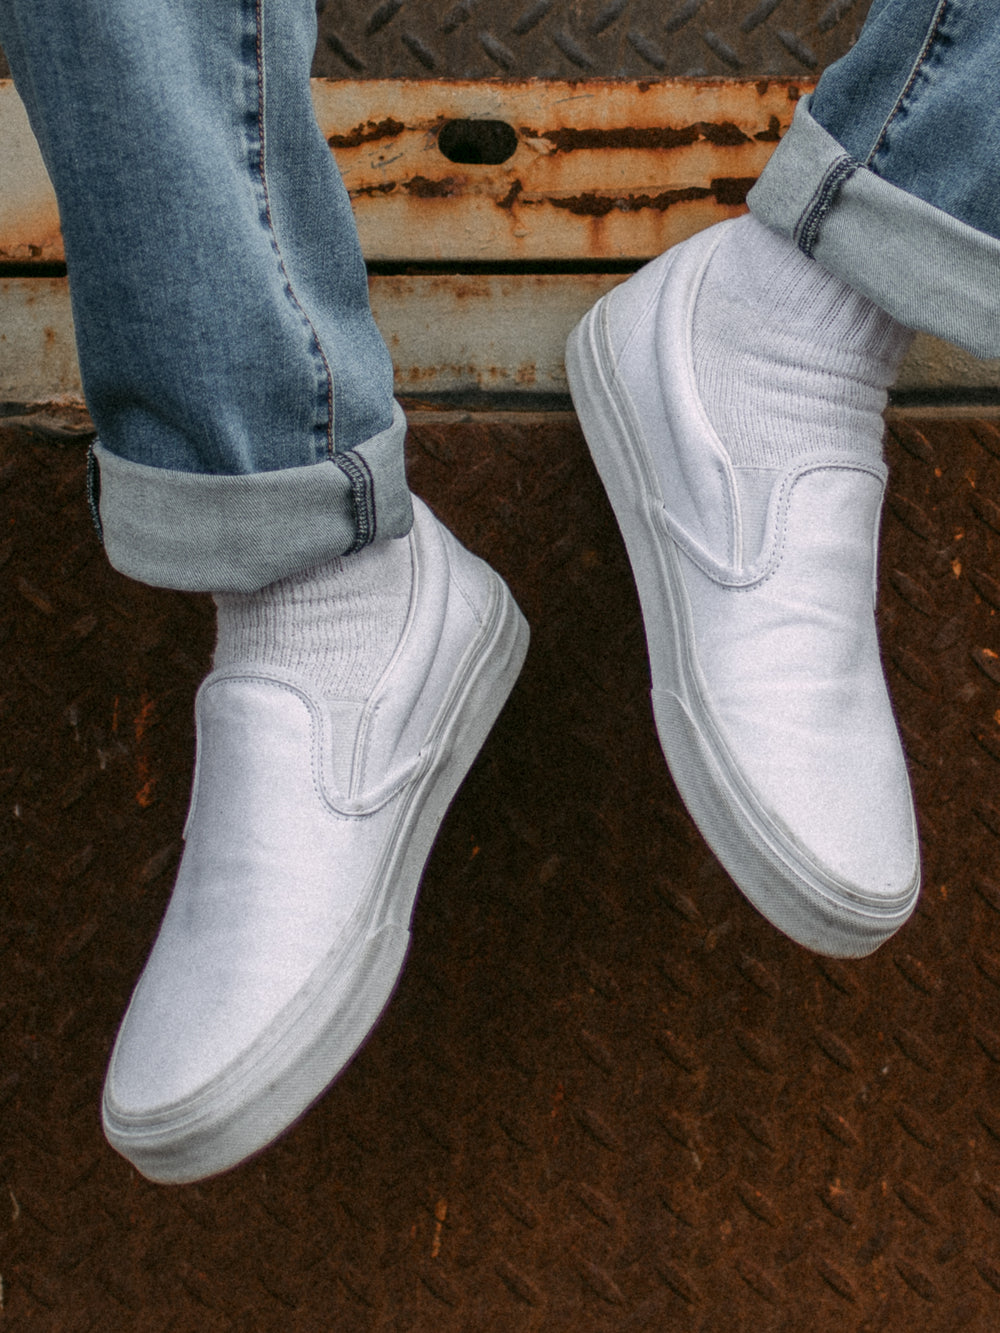 How to Clean White Vans Shoes